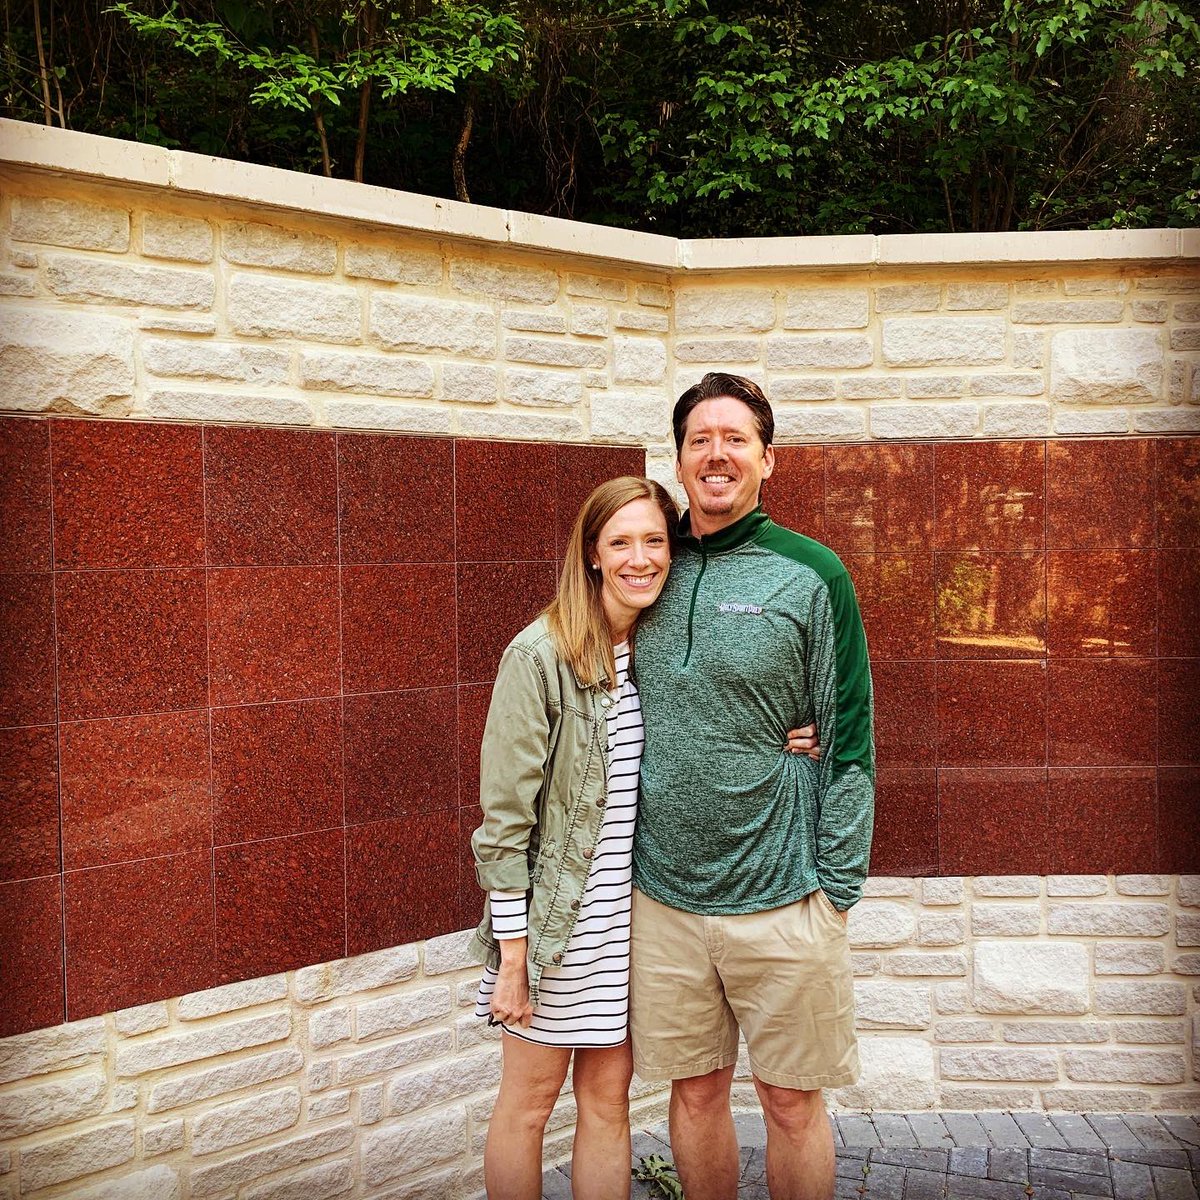 My wife and I selected our columbarium niche @IgnatiusRetreat this morning. This extraordinary time has prompted reflection on mortality and what truly matters in this life. I owe a deep debt of gratitude for the formation and sacramental grace that the @TheJesuits provided to me